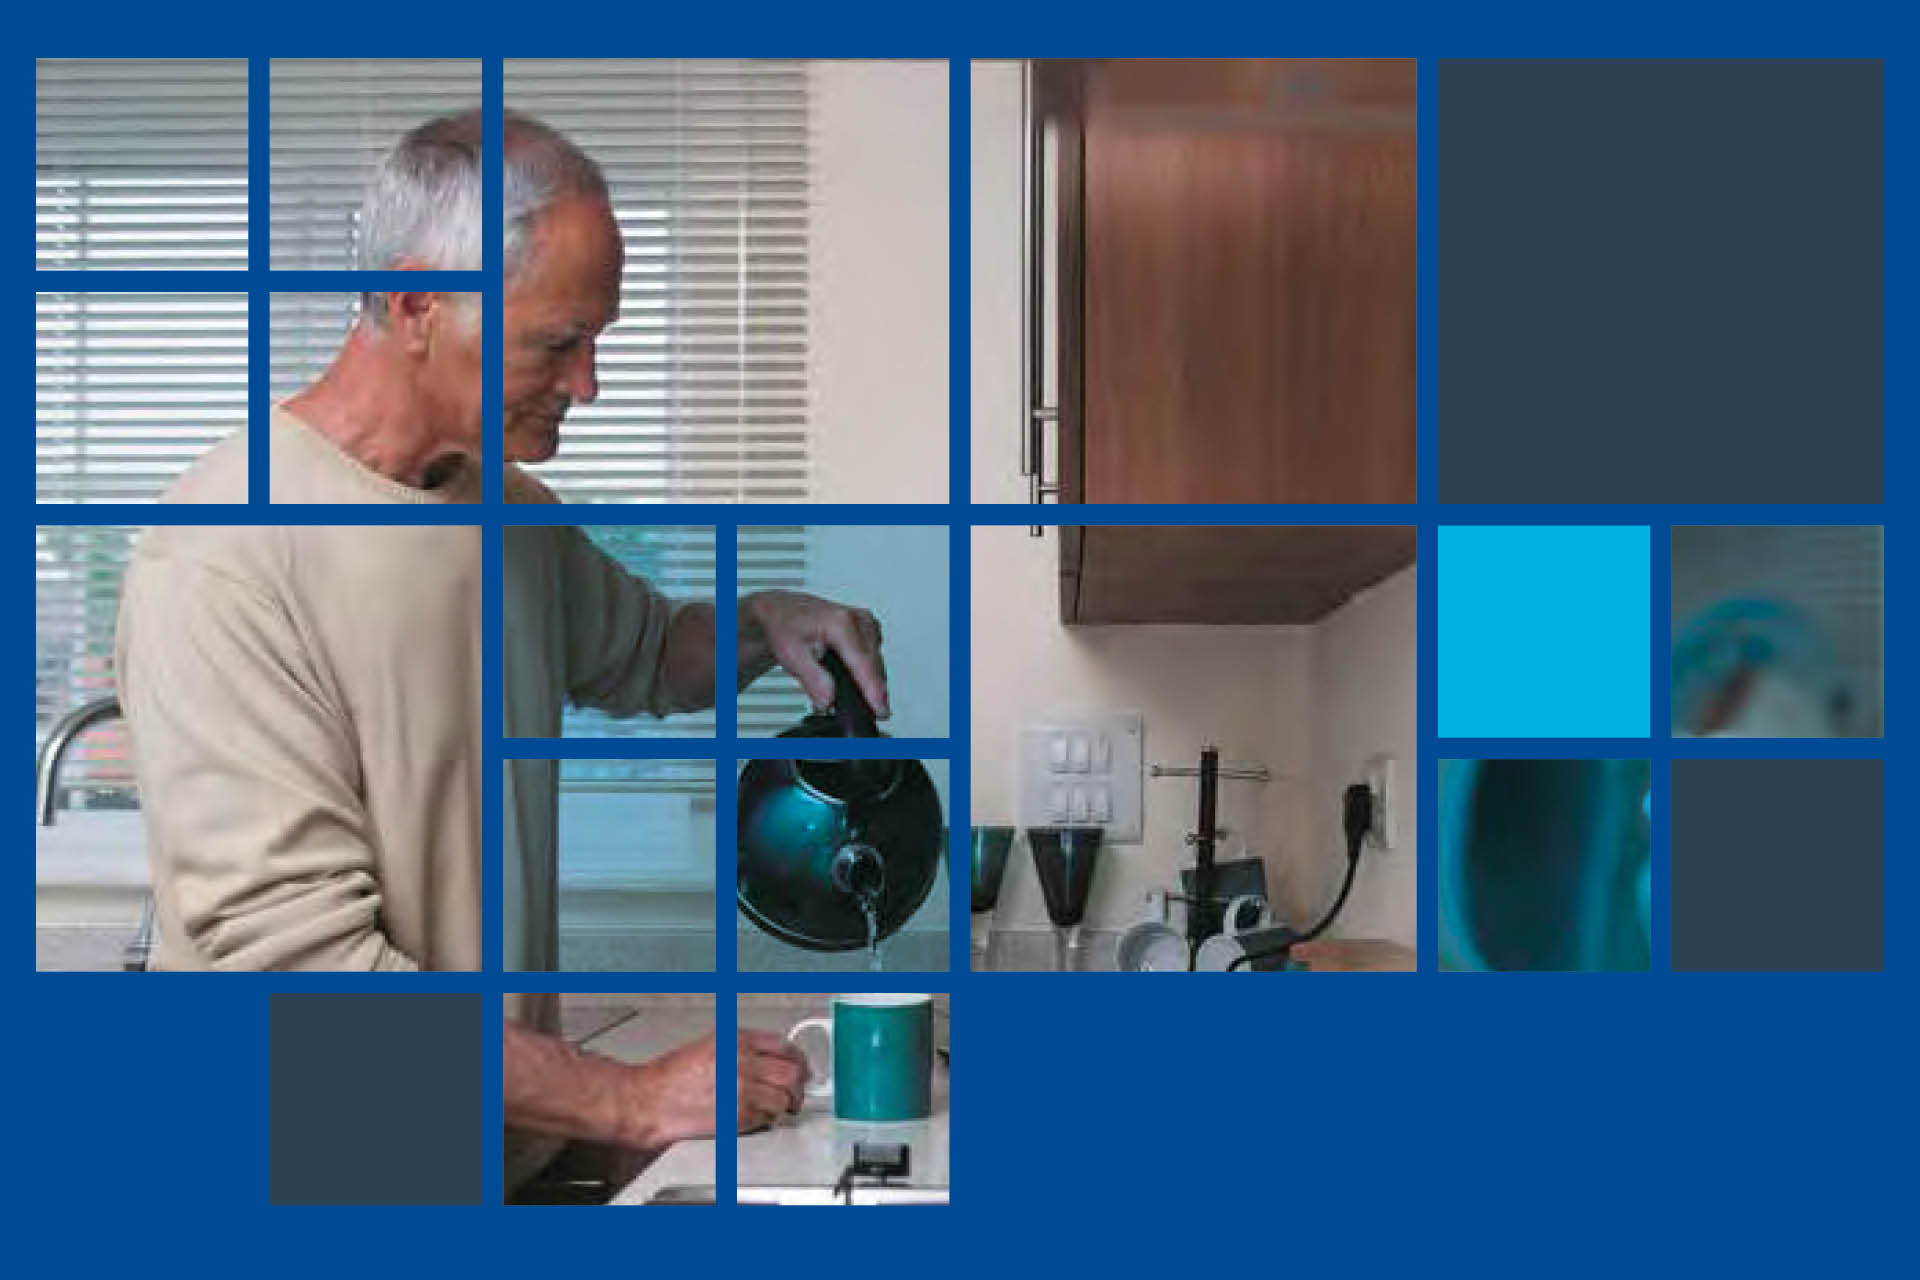 a photo of a man making tea with a blue square overlay